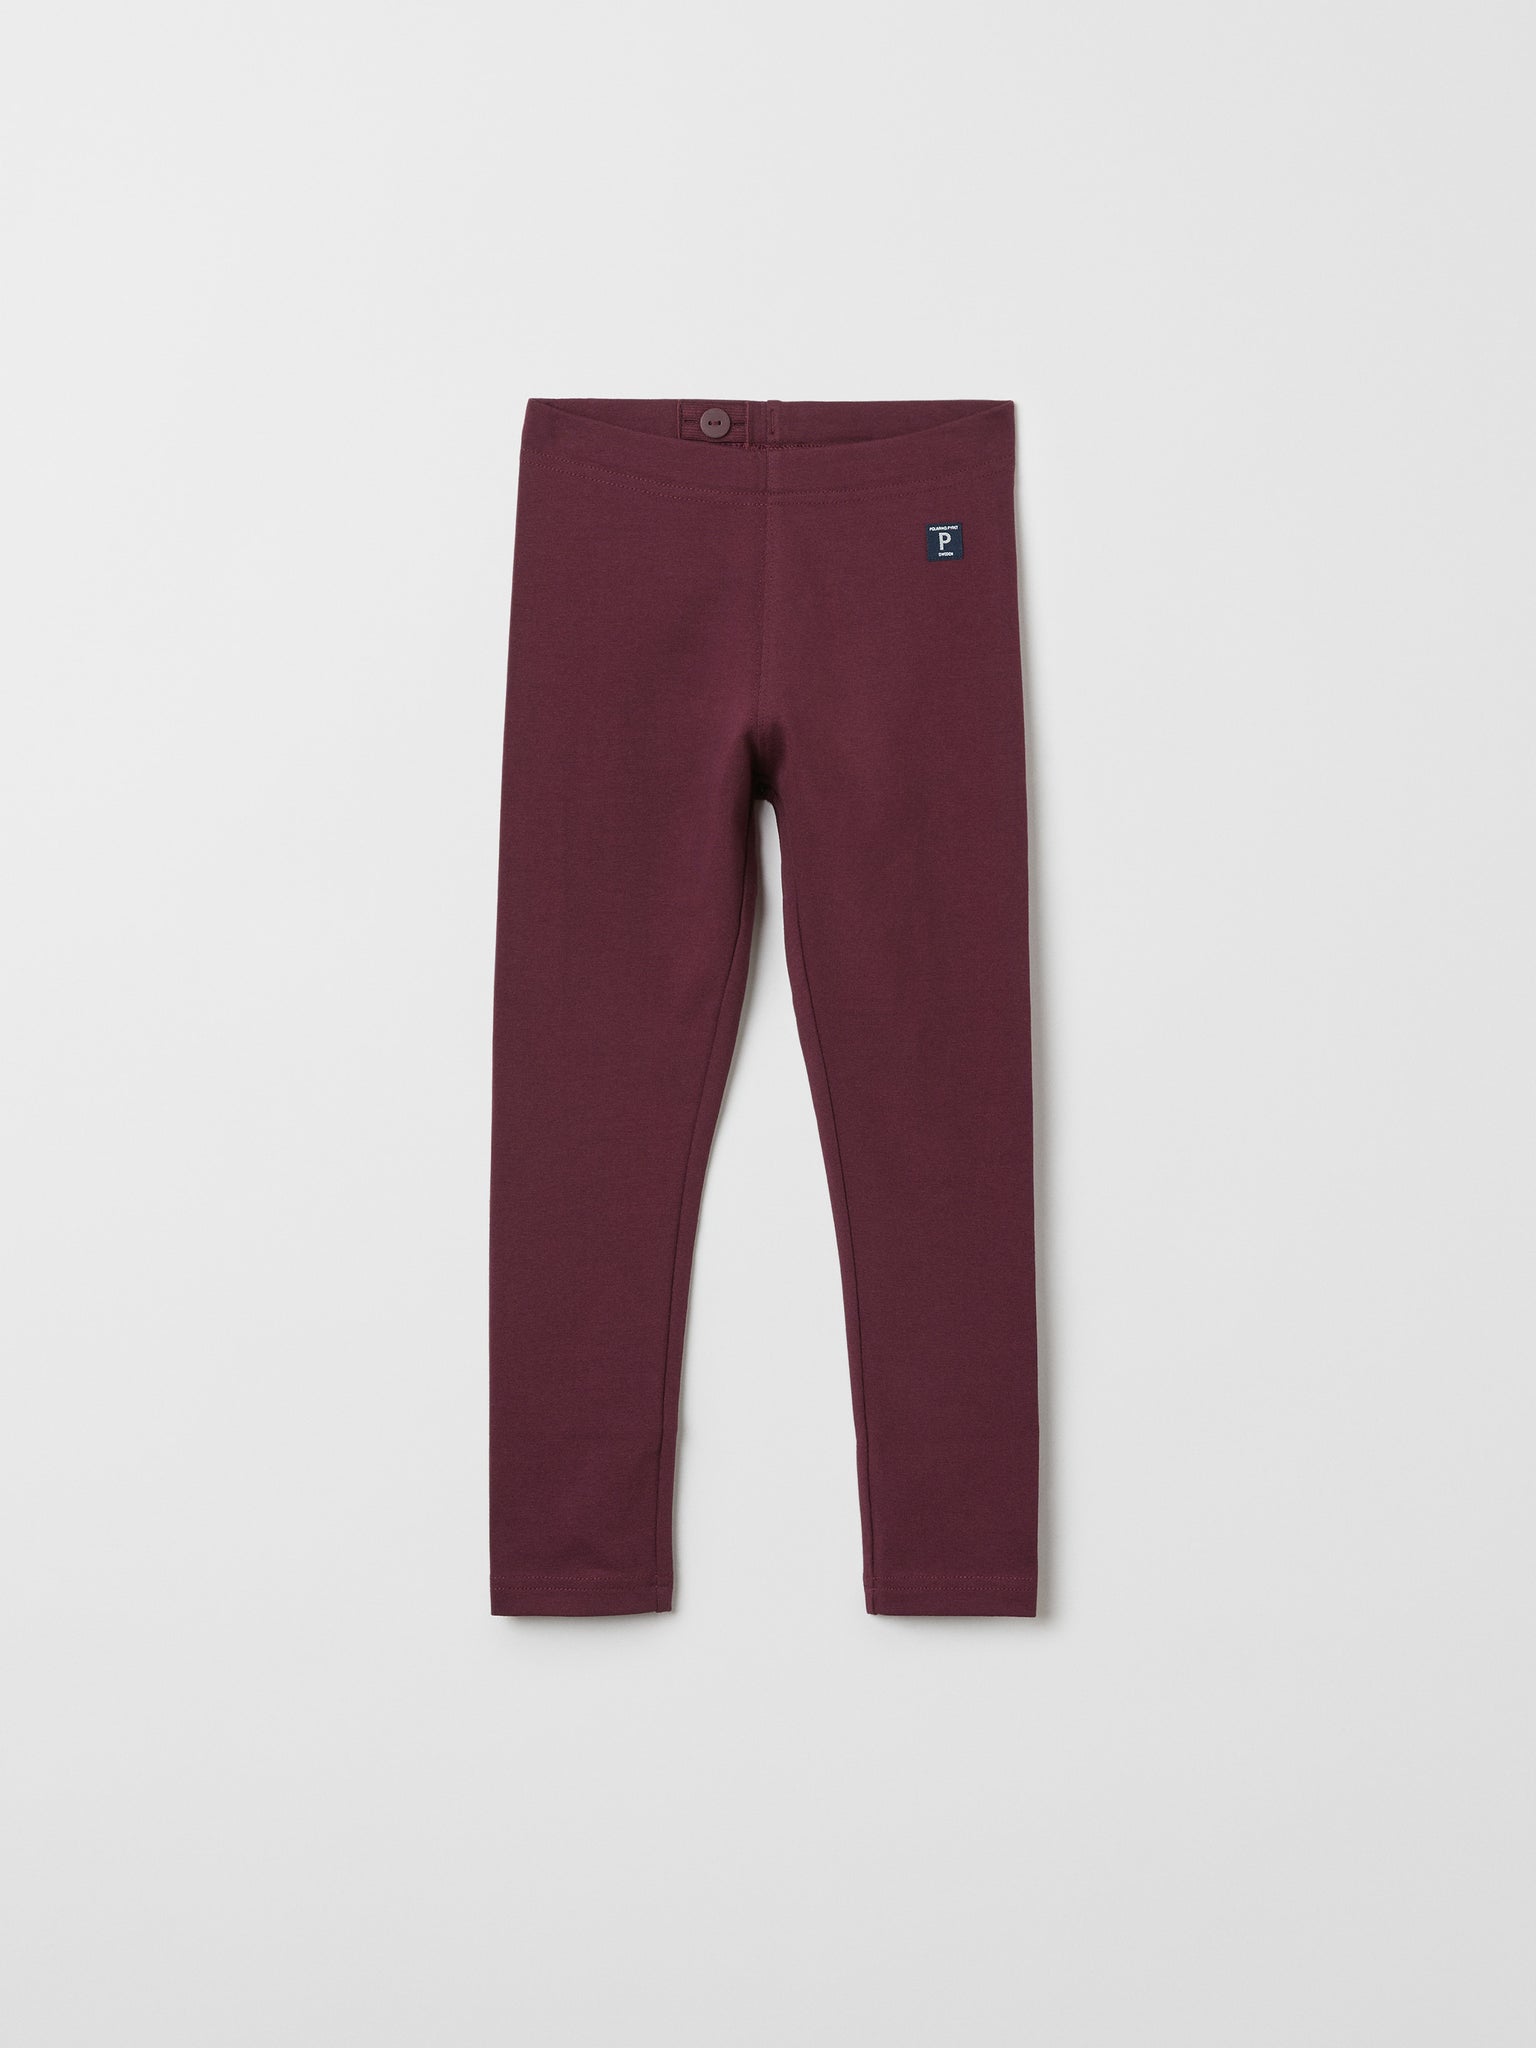 Organic Cotton Burgundy Kids Leggings from the Polarn O. Pyret kidswear collection. Nordic kids clothes made from sustainable sources.